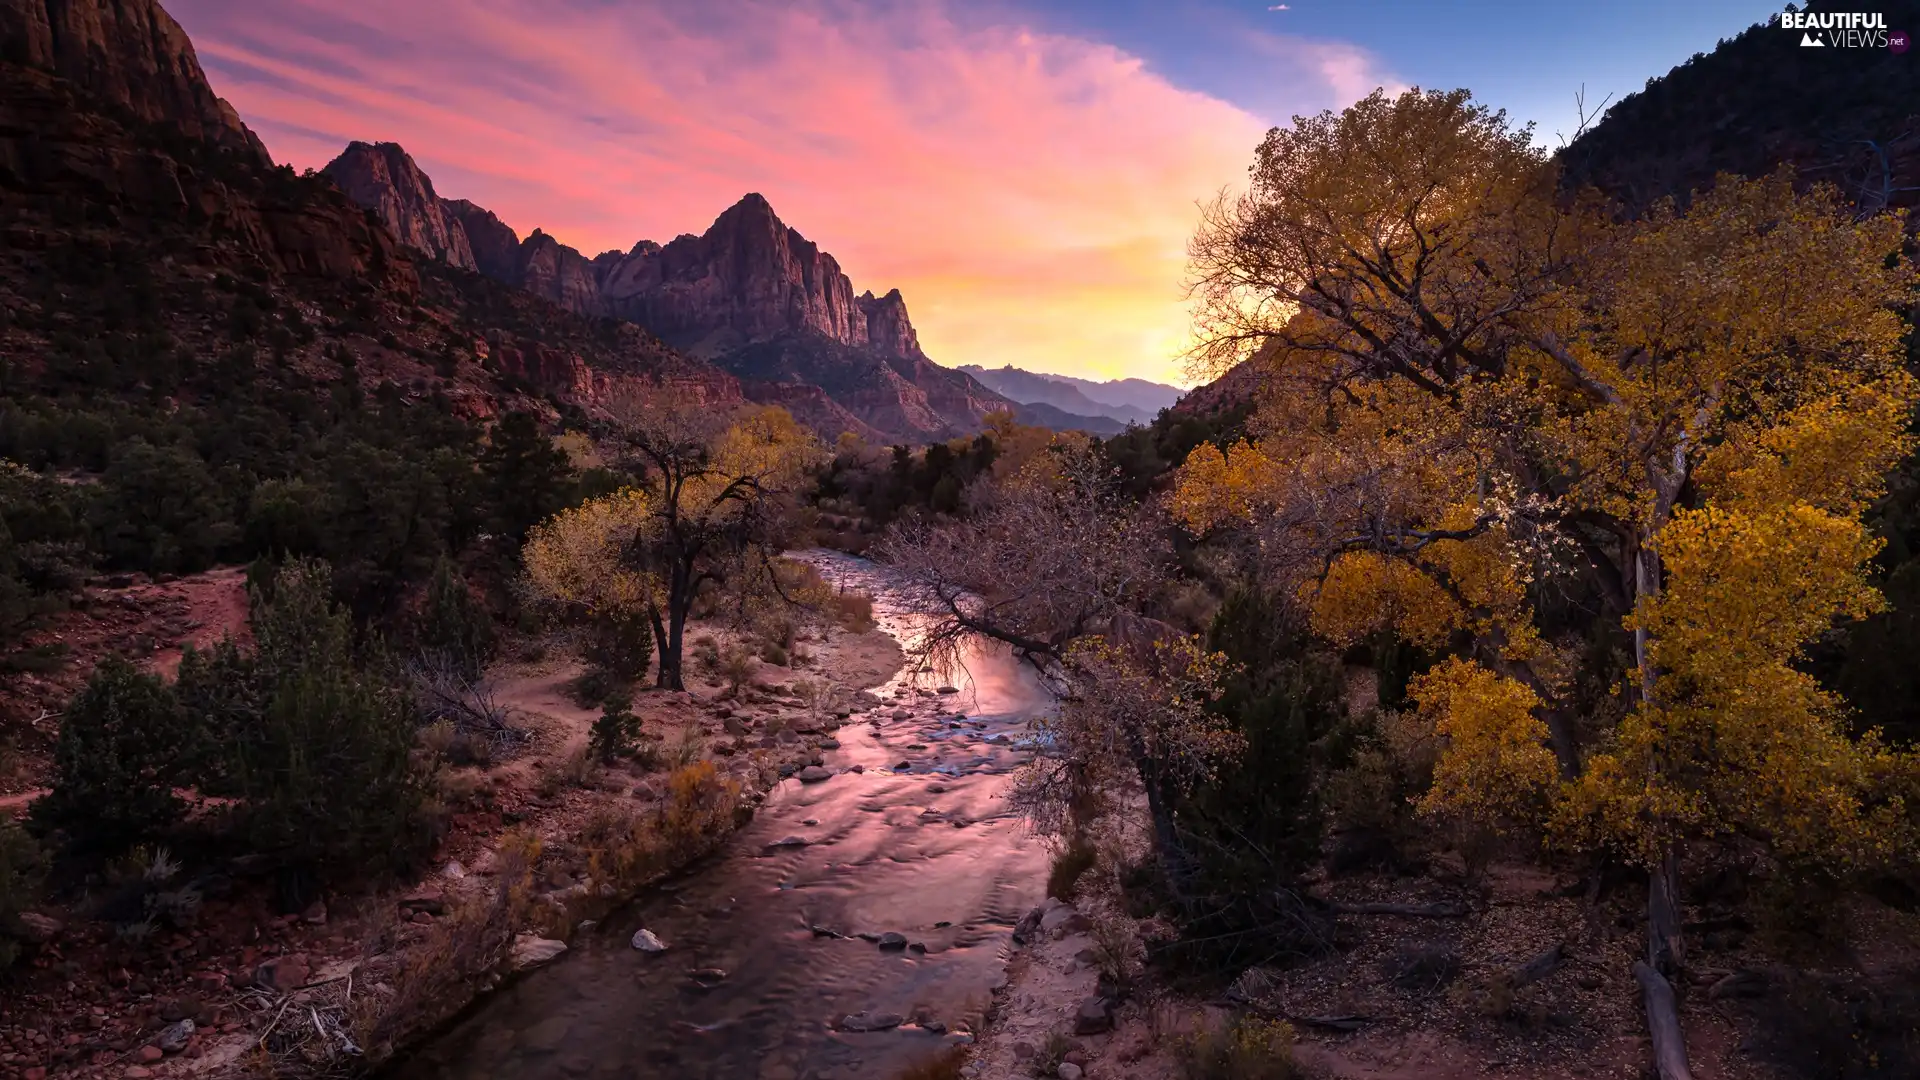 Stones, Zion National Park, viewes, trees, Virgin River, The United States, Great Sunsets, River, Utah State, rocks, Mountain Watchman